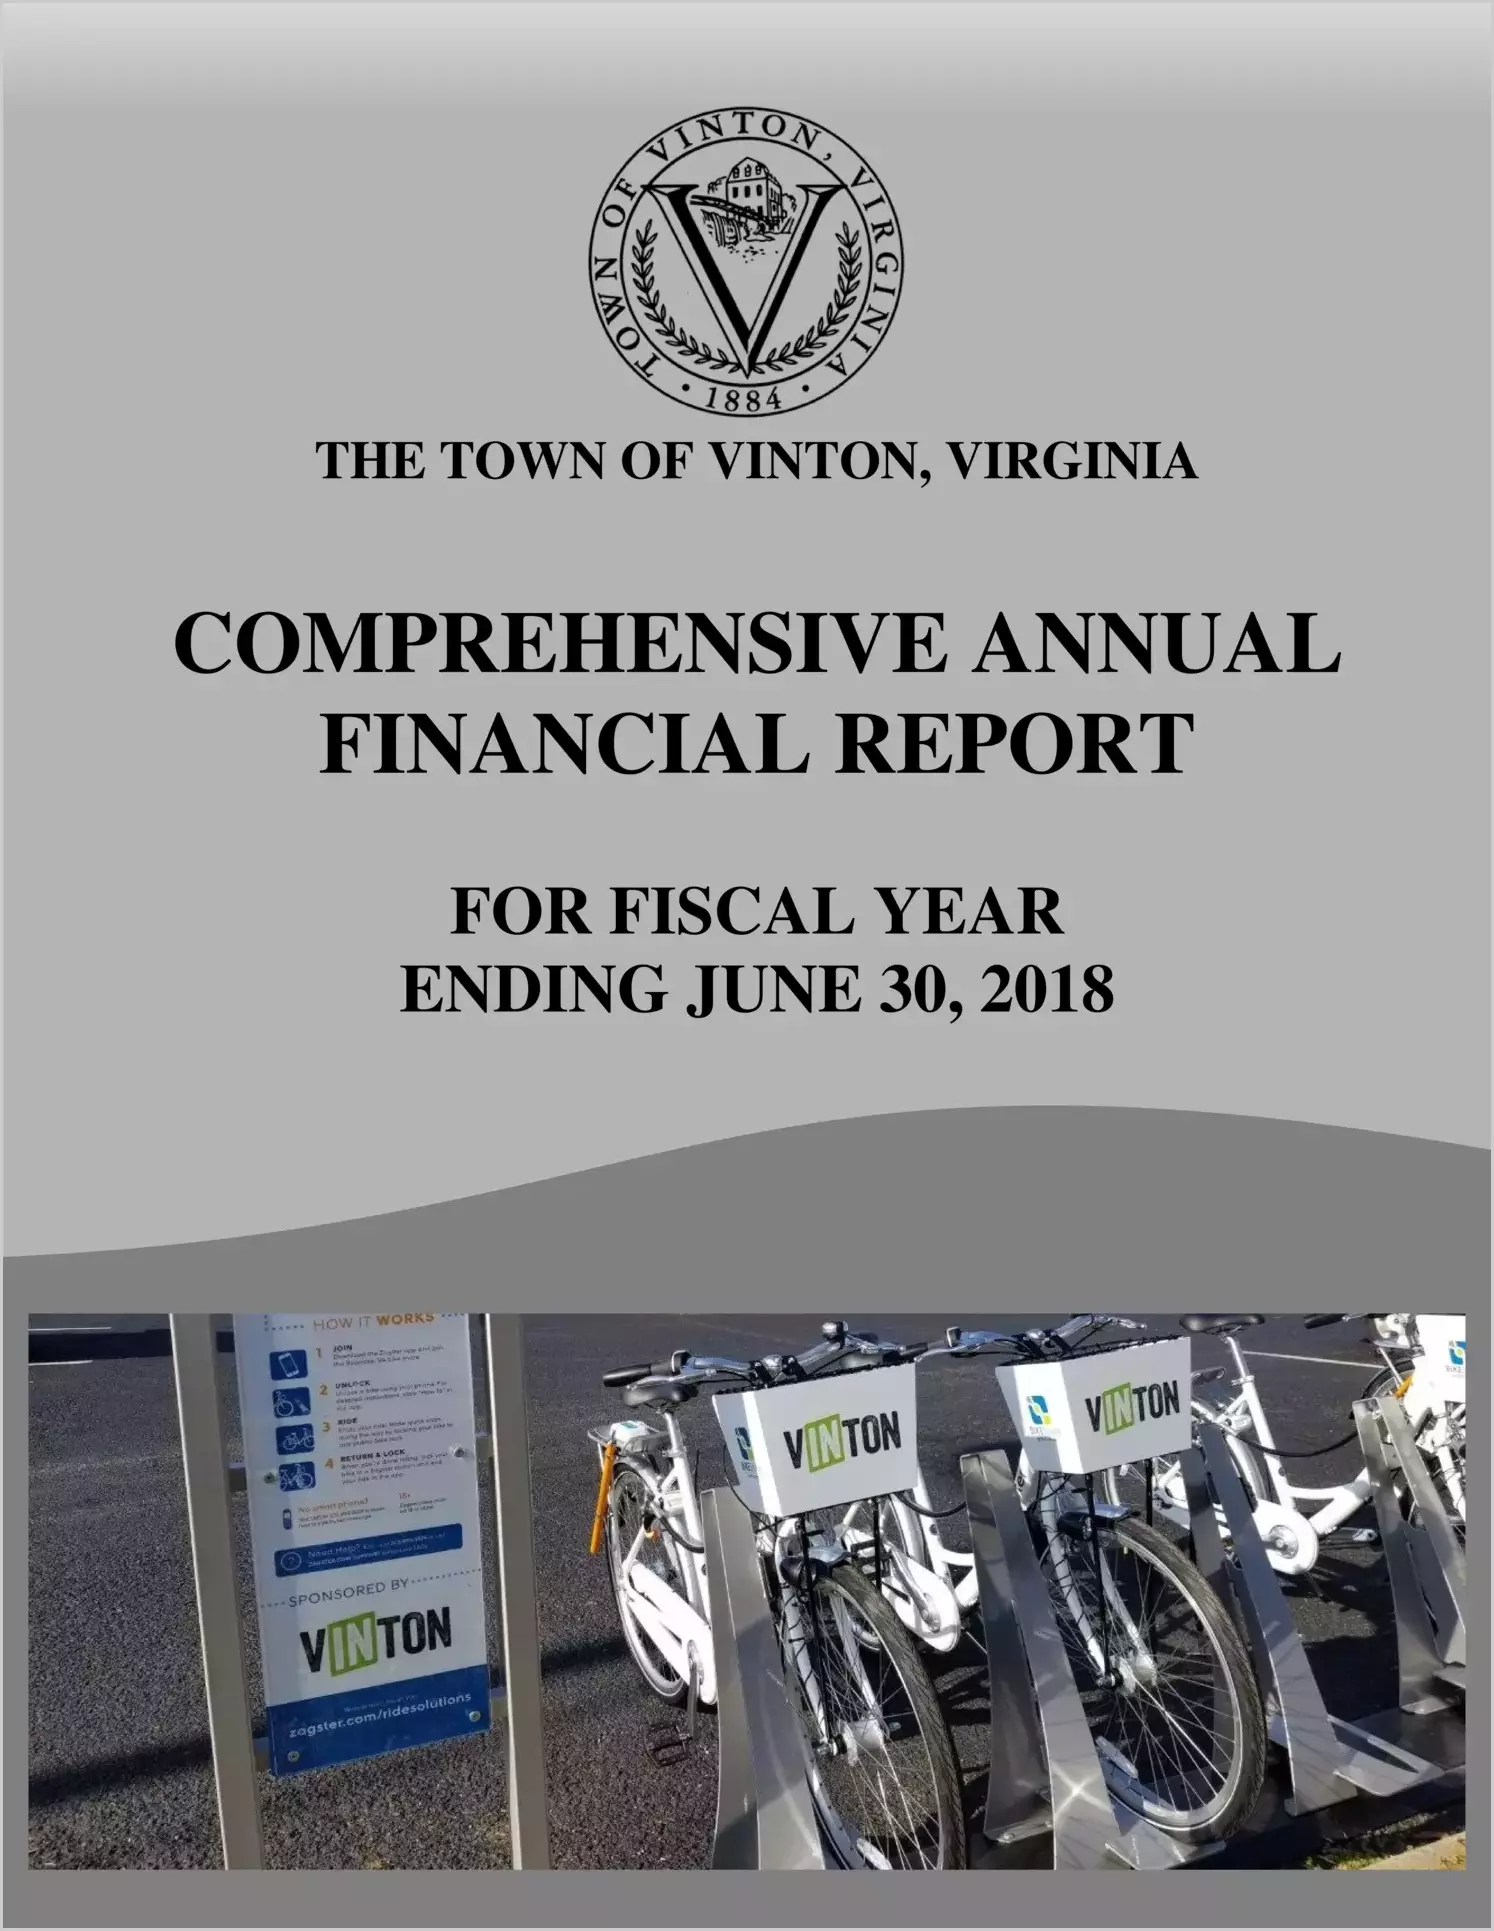 2018 Annual Financial Report for Town of Vinton